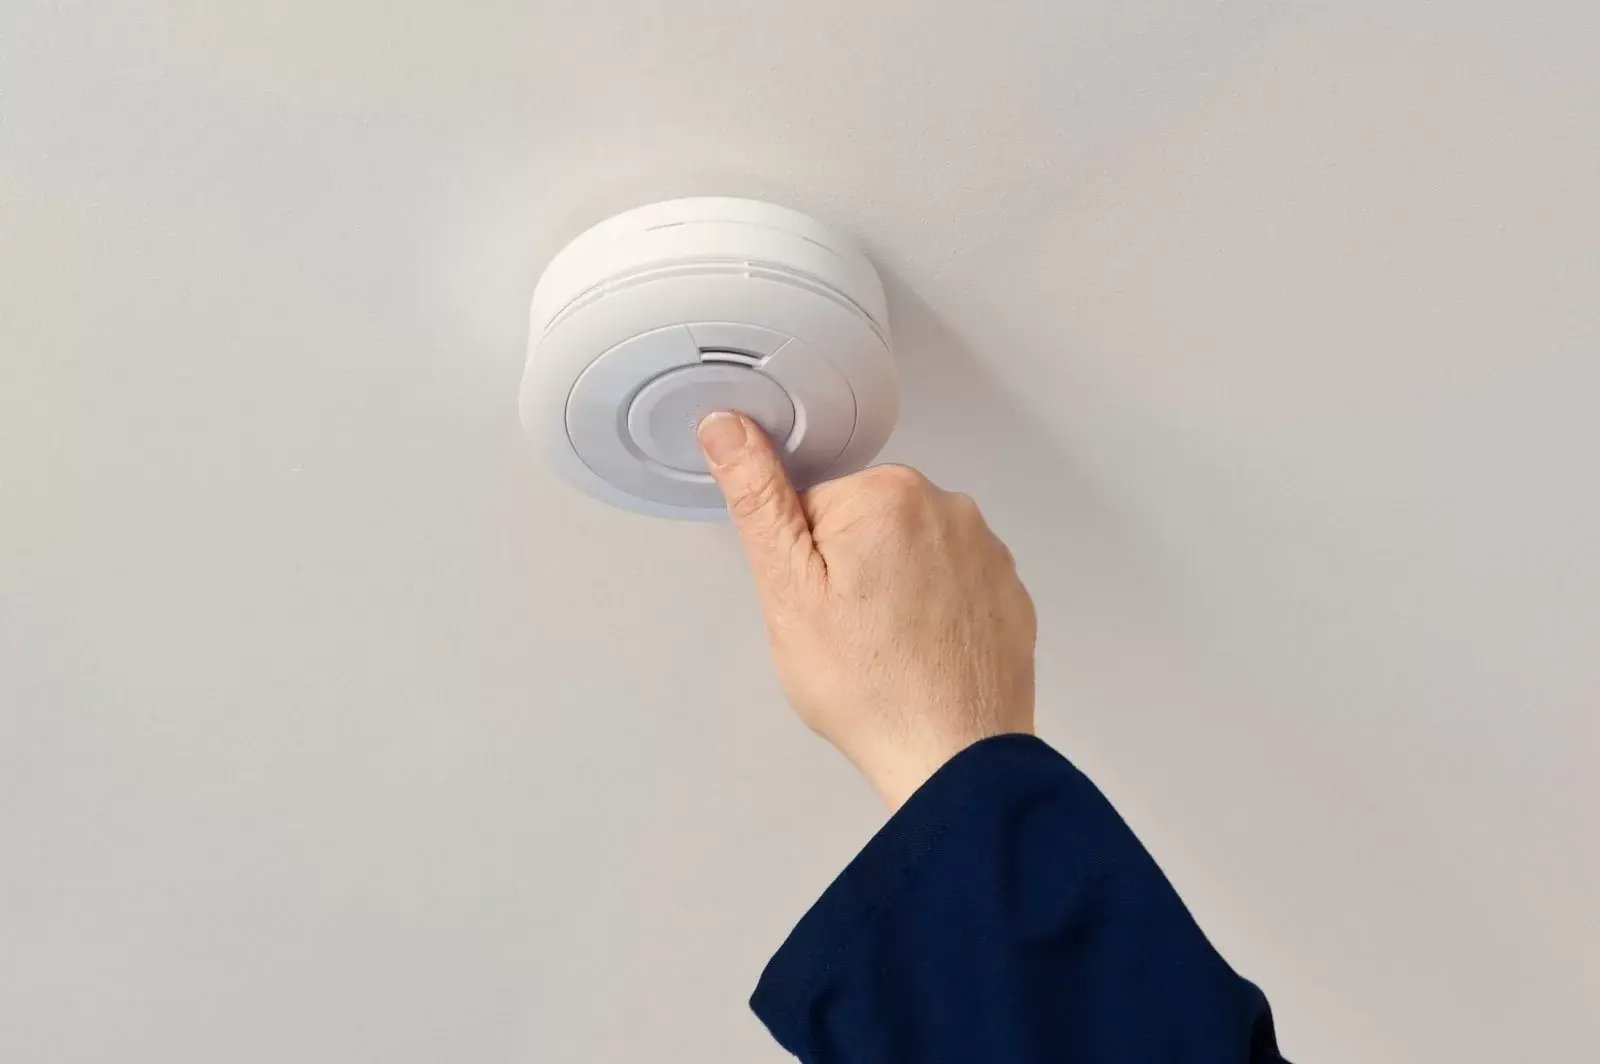 Pressing the button to test a smoke alarm on the ceiling.